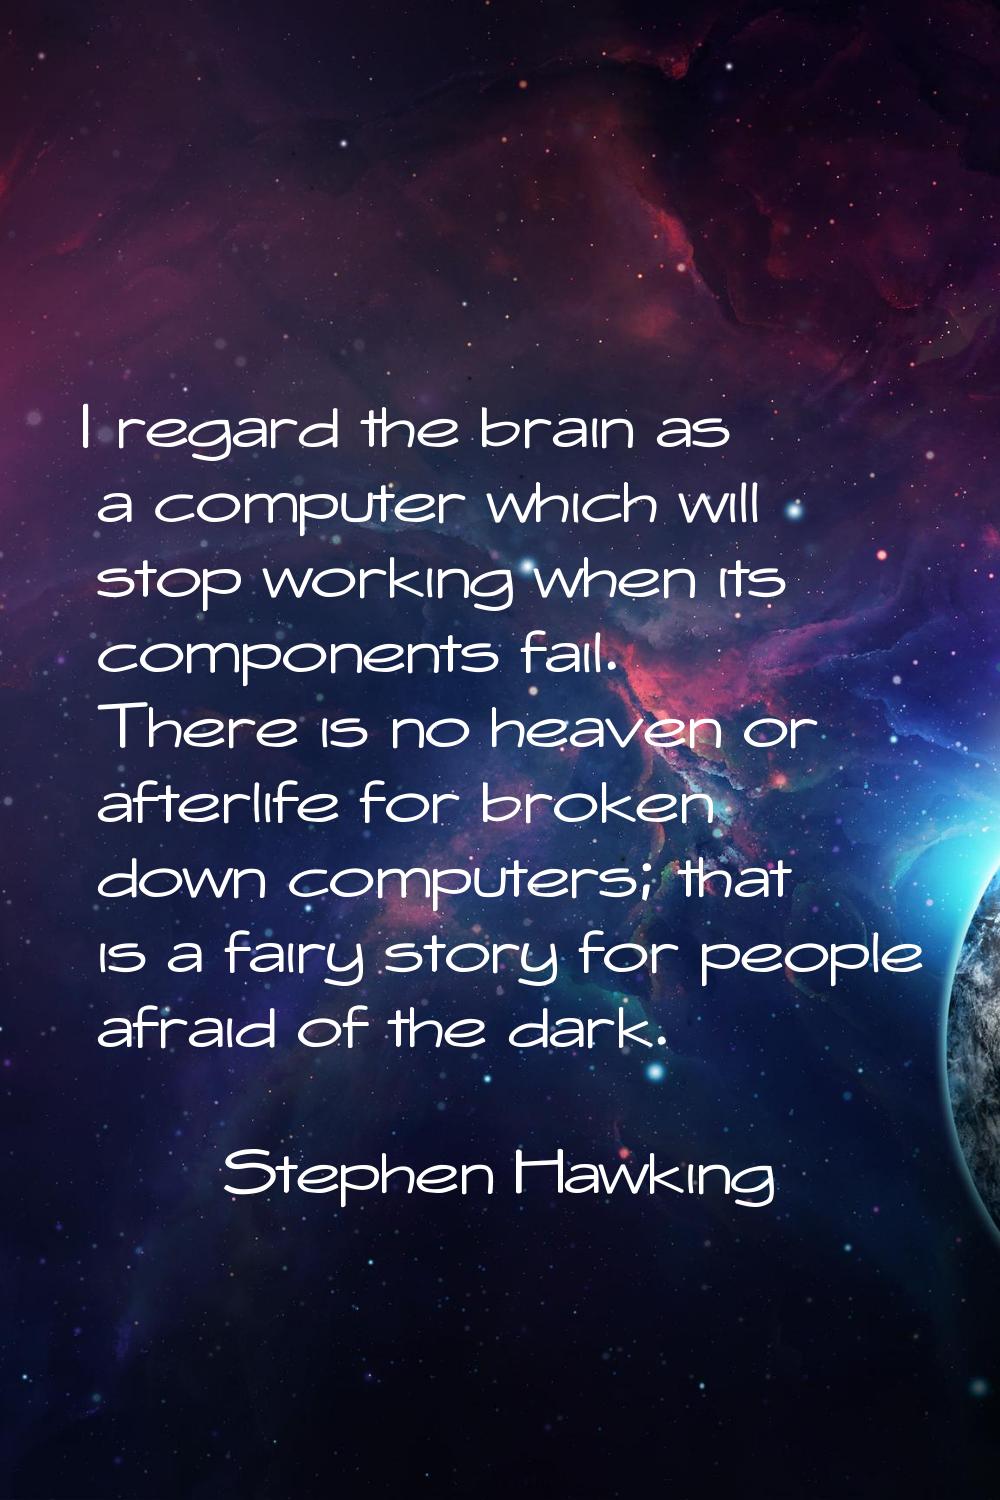 I regard the brain as a computer which will stop working when its components fail. There is no heav